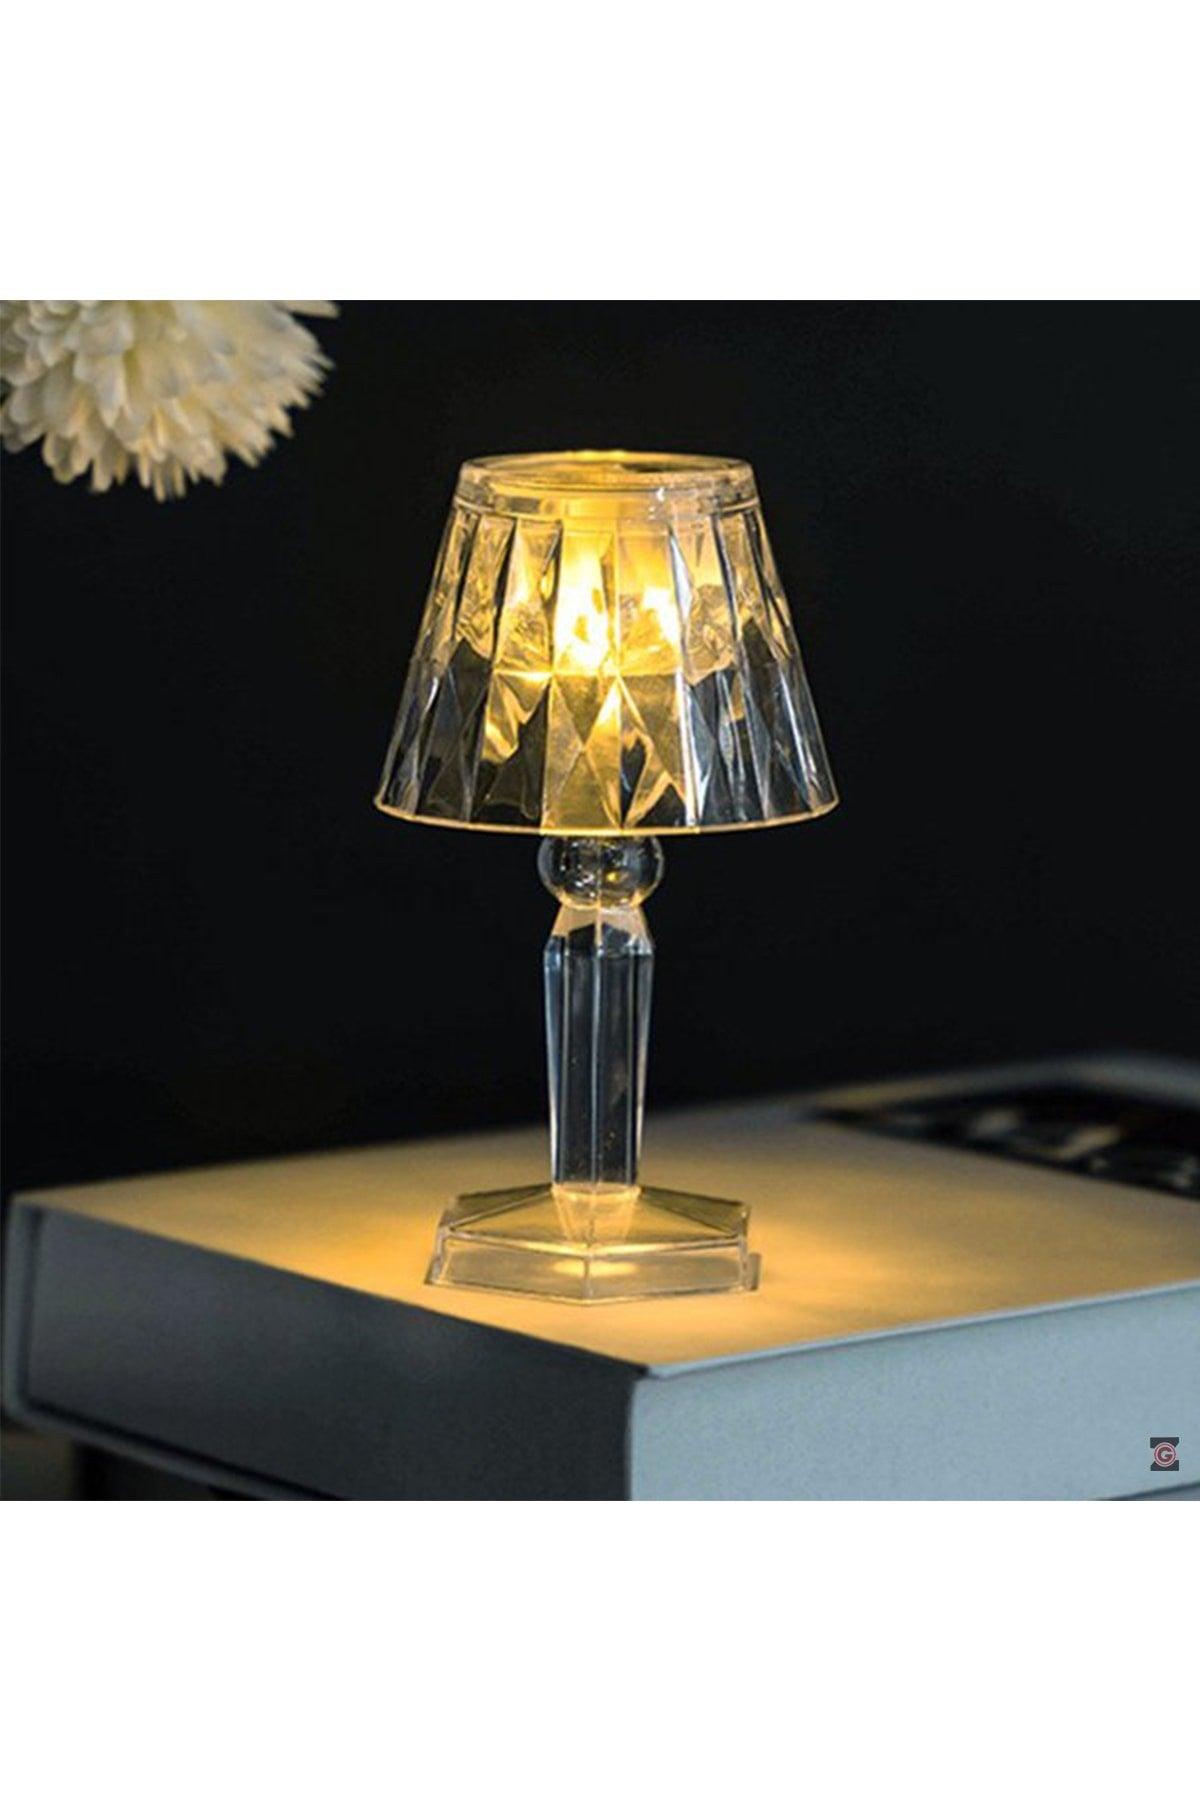 2 Piece Crystal Diamond Led Table Lamp With Battery